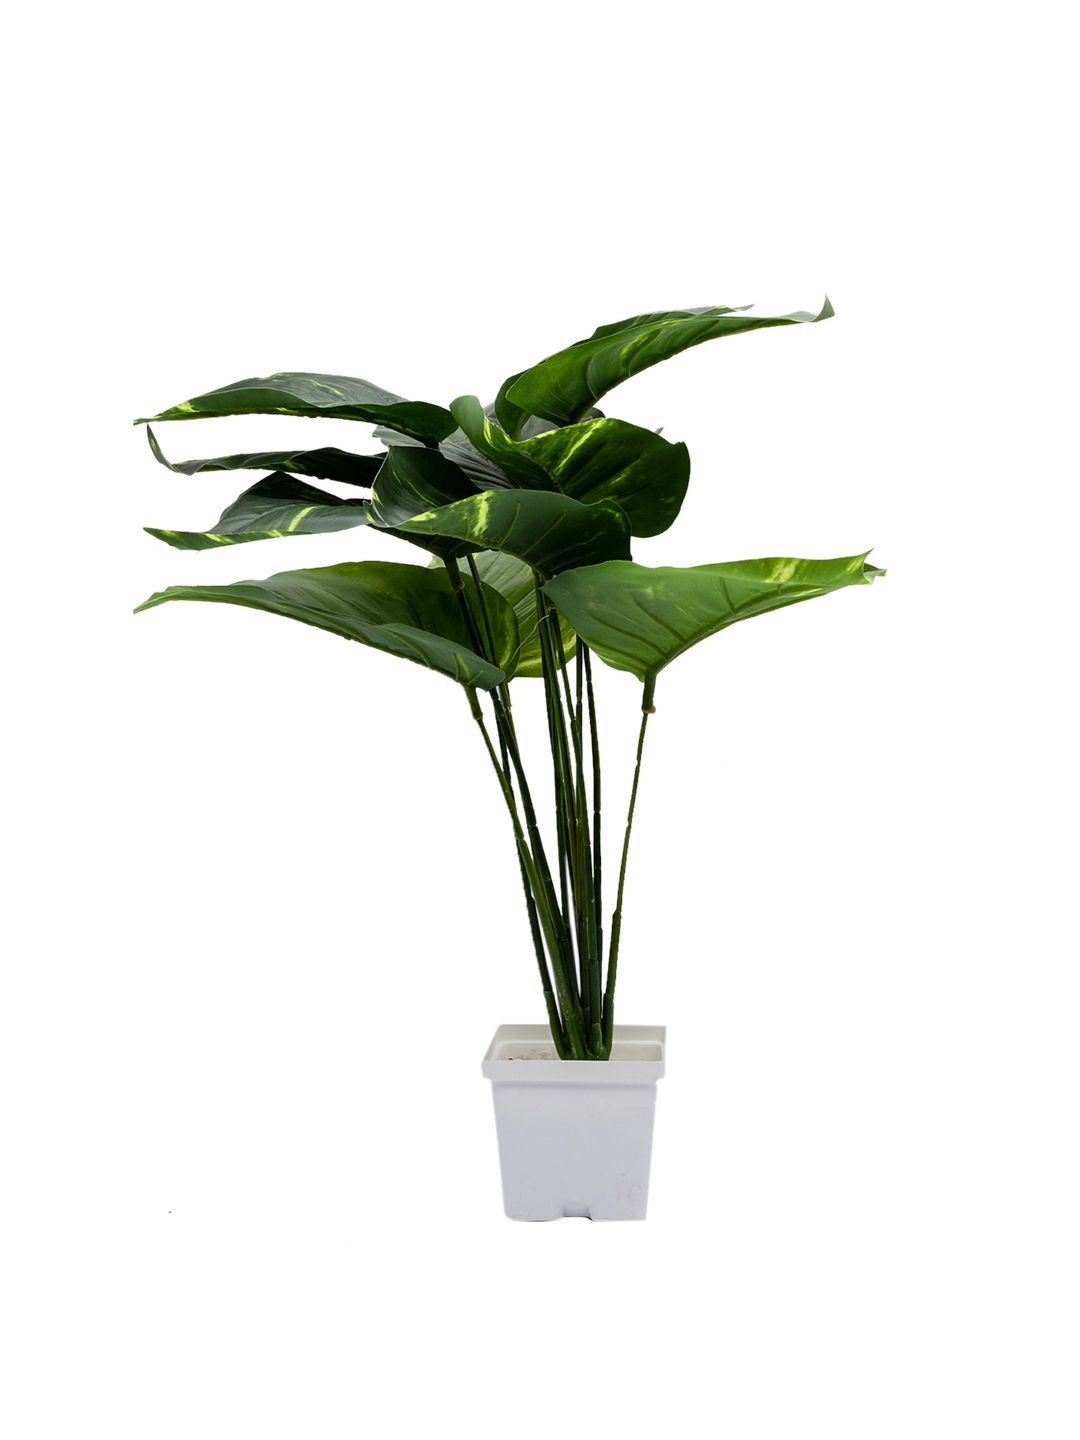 MARKET99 Green Croton Artificial Plant With Pot Price in India